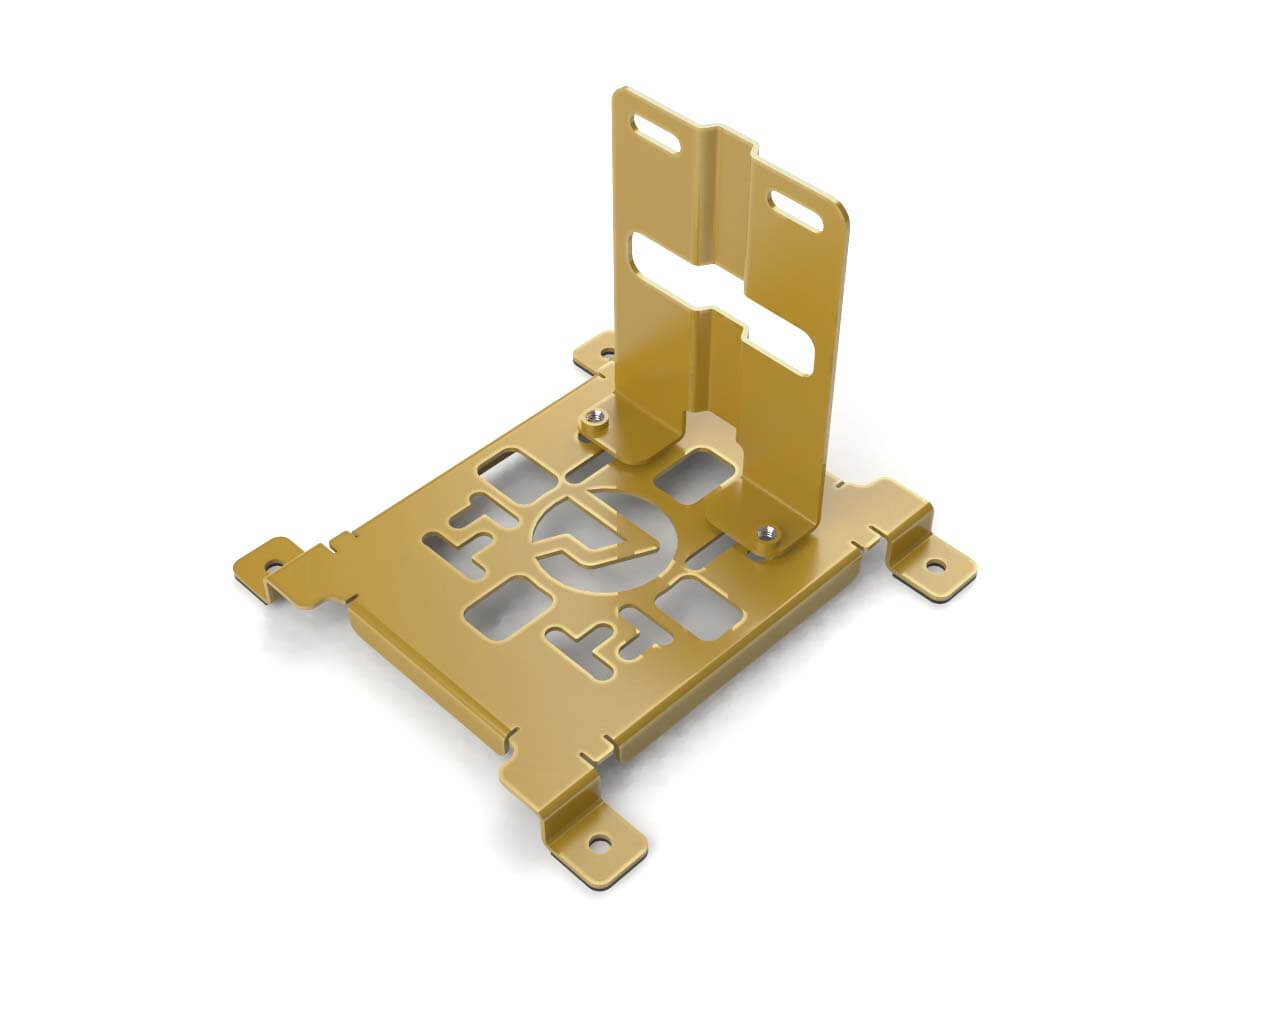 PrimoChill SX CTR2 Spider Mount Bracket Kit - 120mm Series - PrimoChill - KEEPING IT COOL Candy Gold